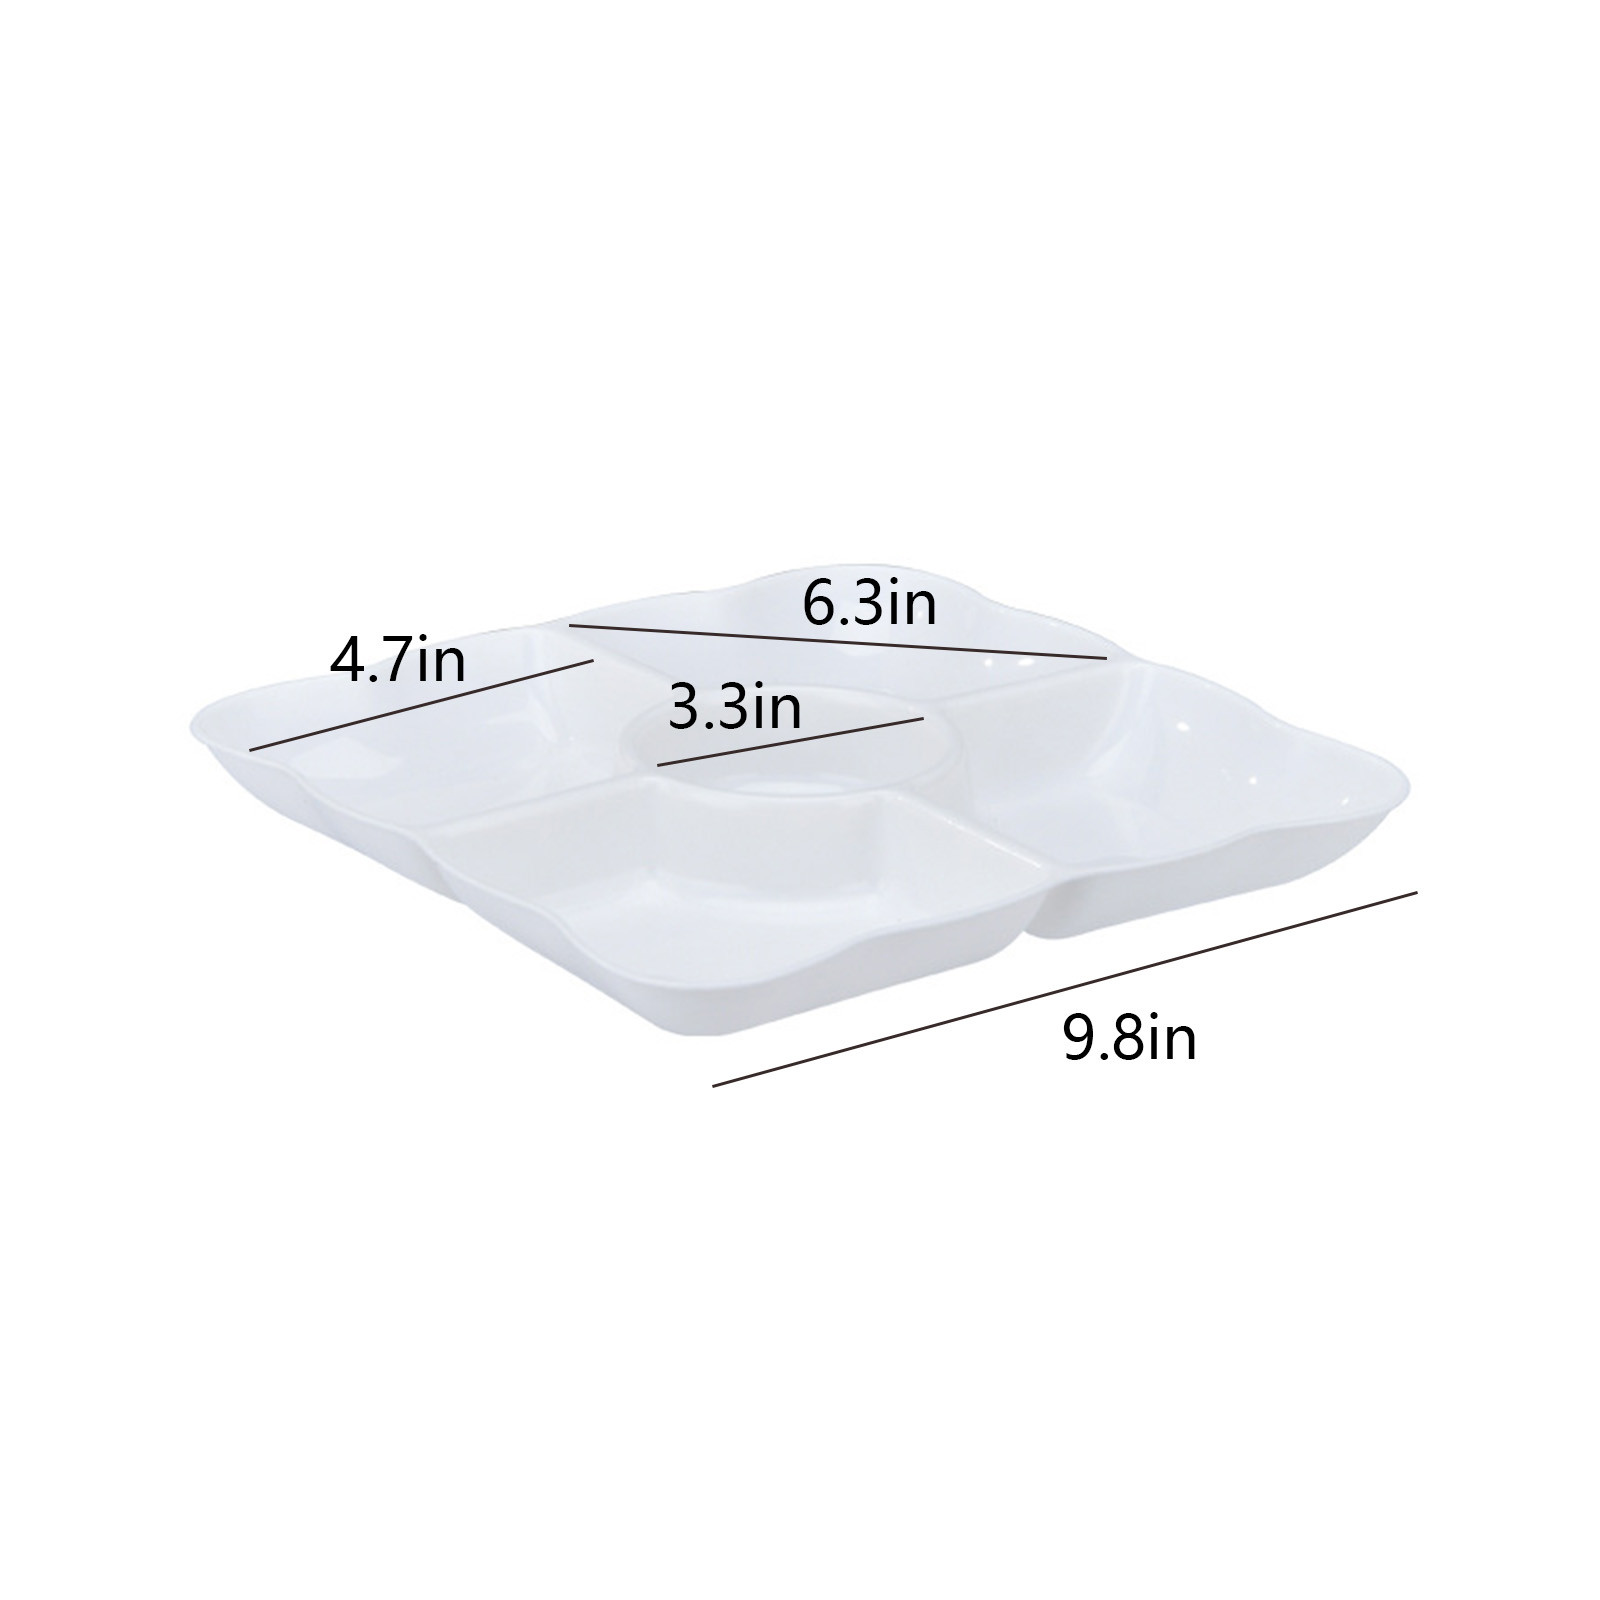 Matoen Divided Serving Dish, Appetizer Snack Tray Platter for Fruit, Veggies, Candy, Chip and Dip, Relish Tray for Christmas Thanksgiving Party, 5 Compartment, White - image 4 of 6